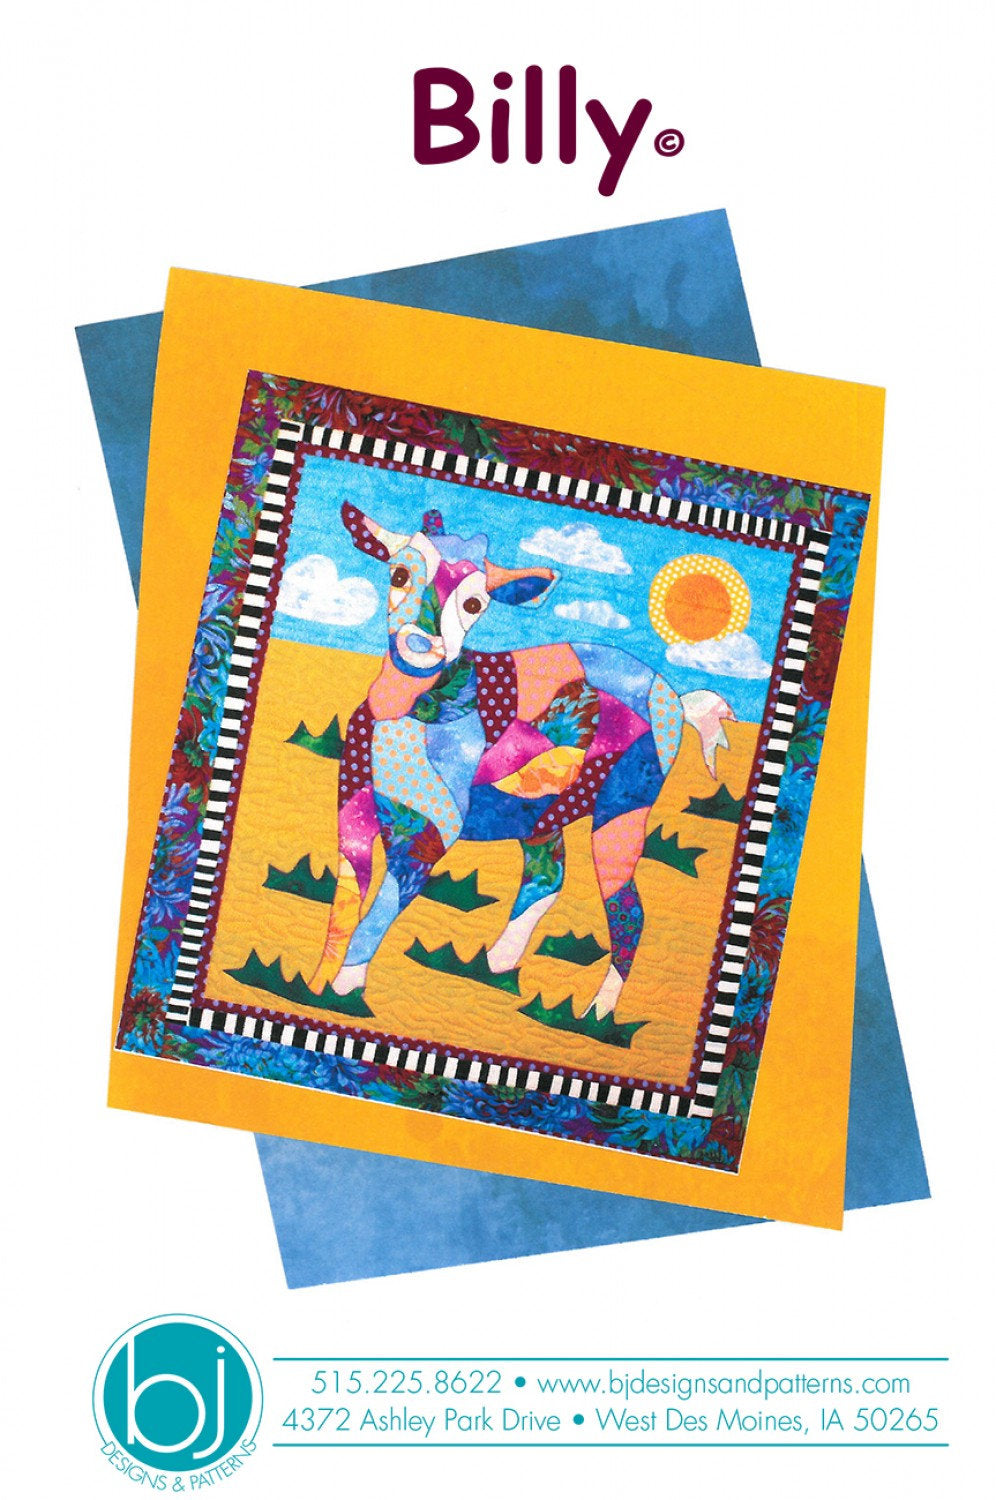 BJ Designs & Patterns Billy the Goat Applique Quilt Pattern Front Cover